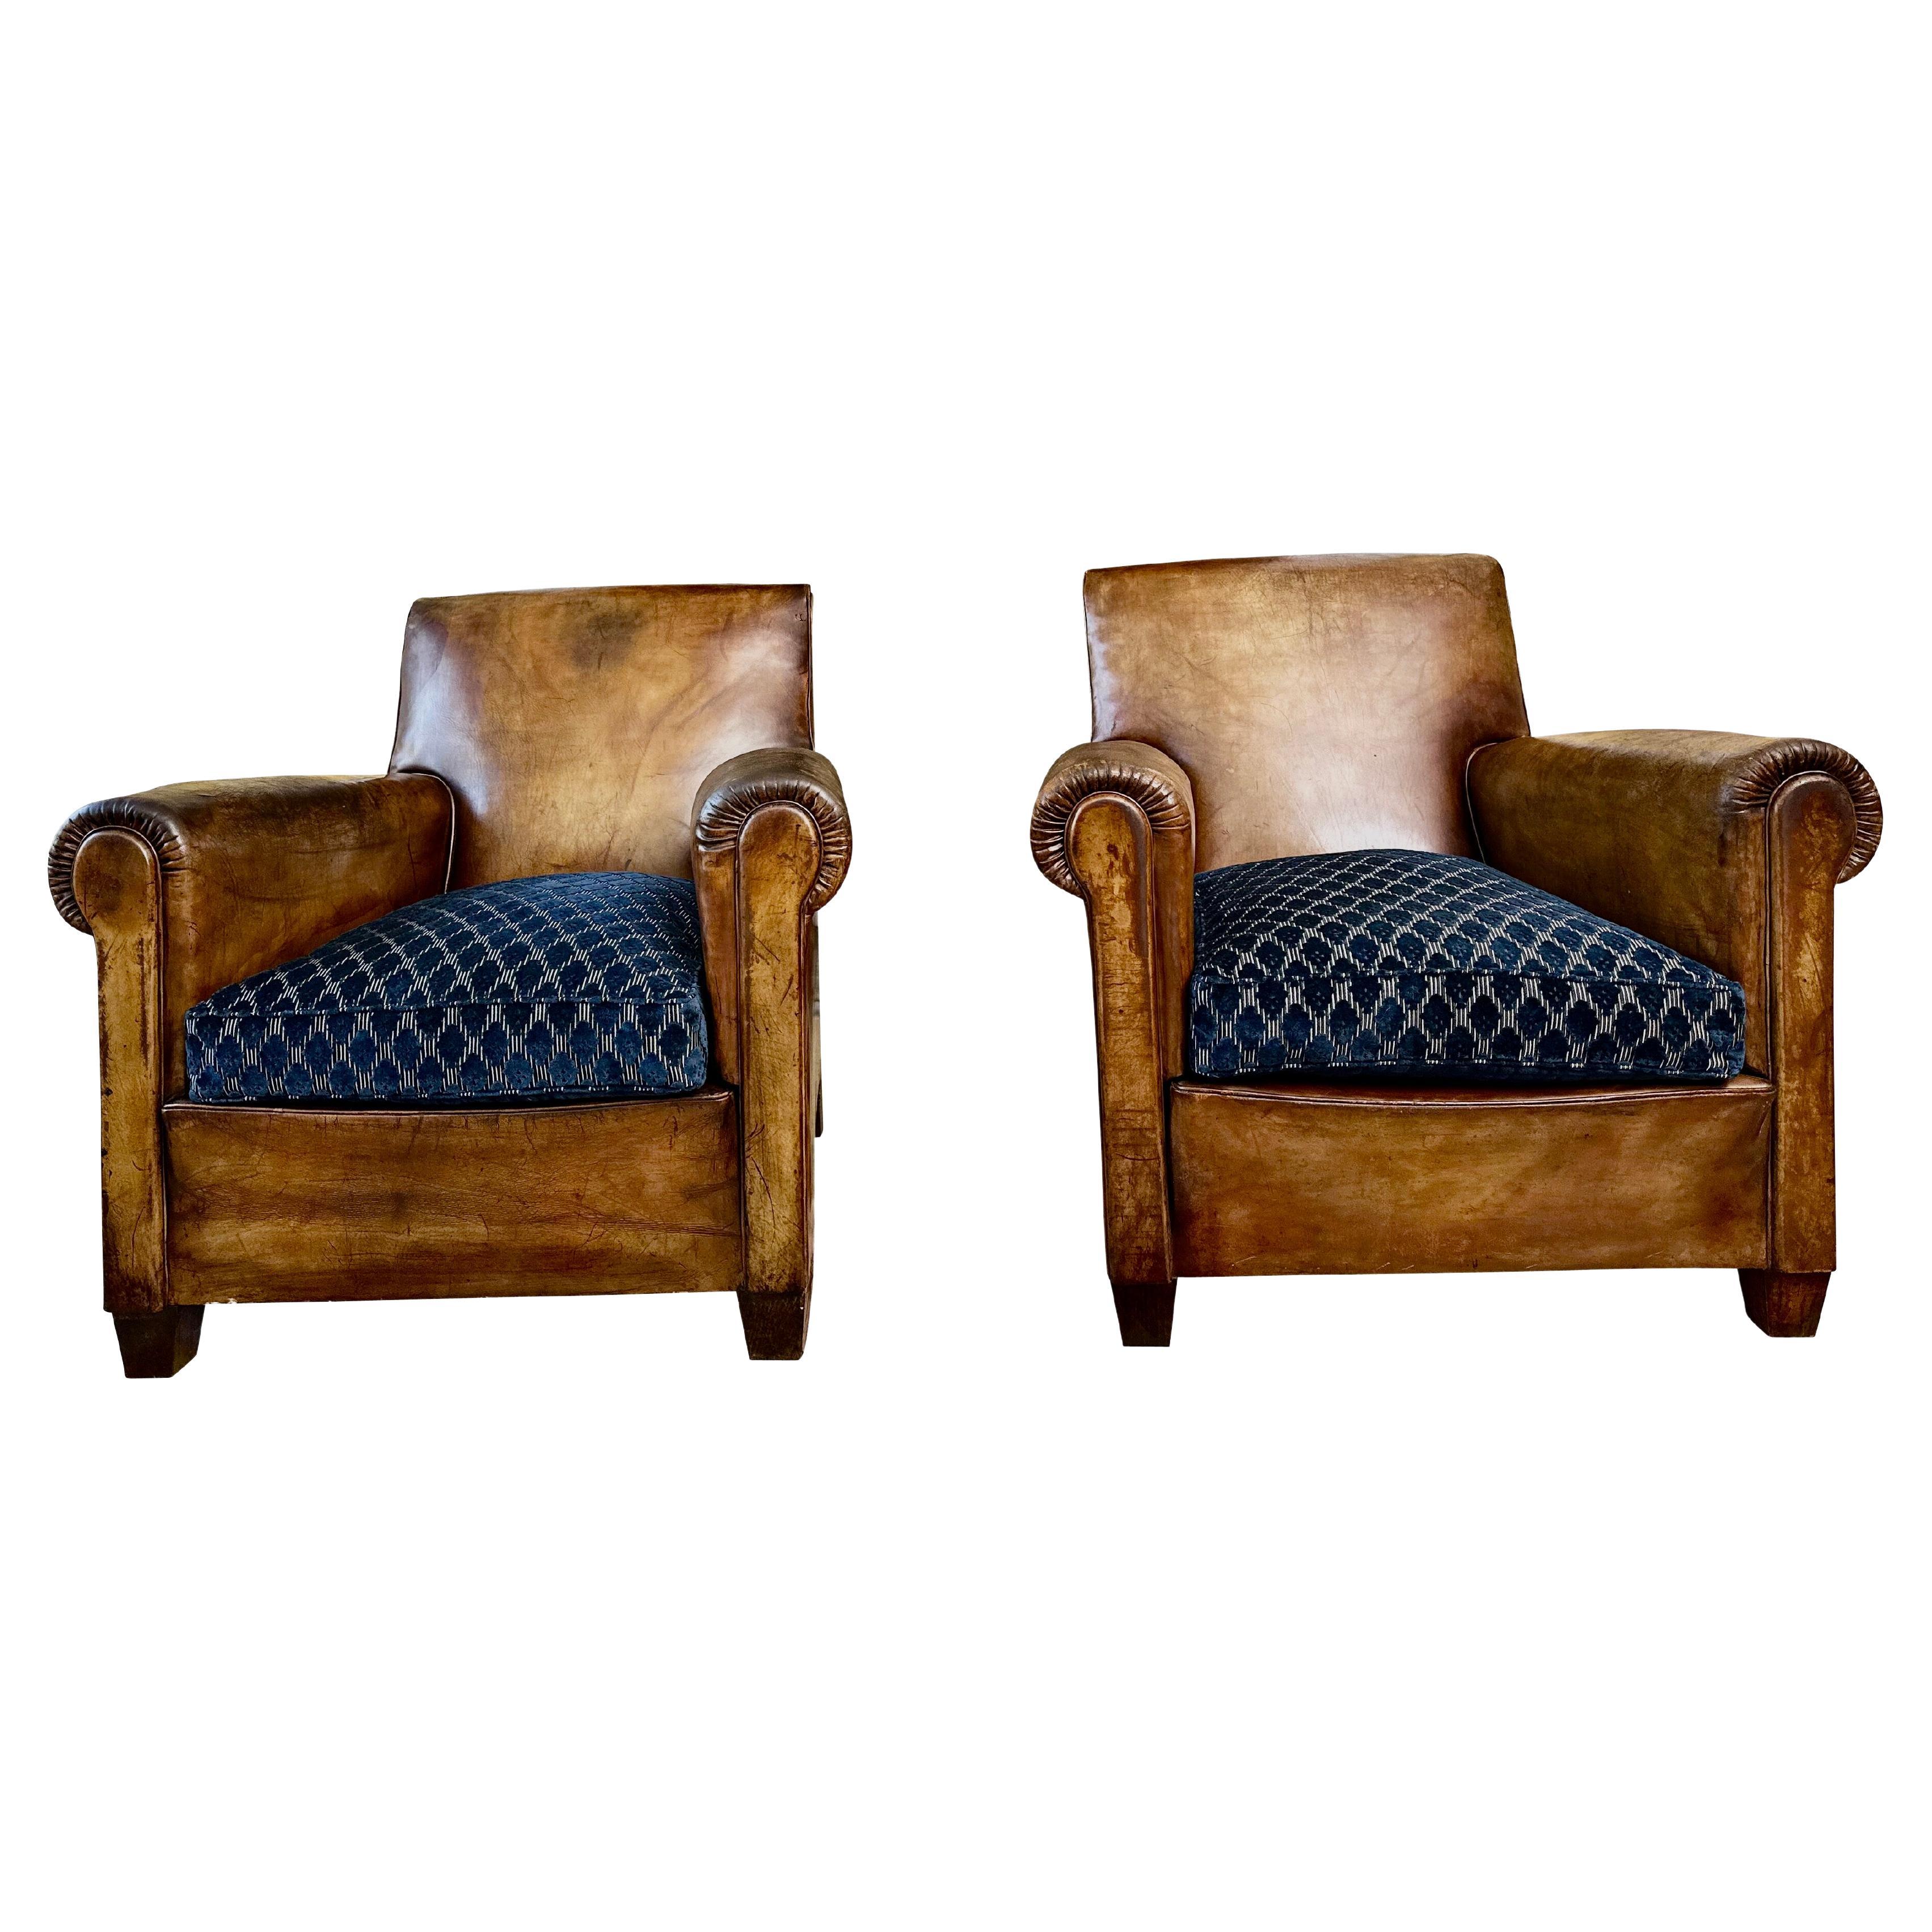 1930's Vintage Art Deco Leather Club Chairs - A Pair